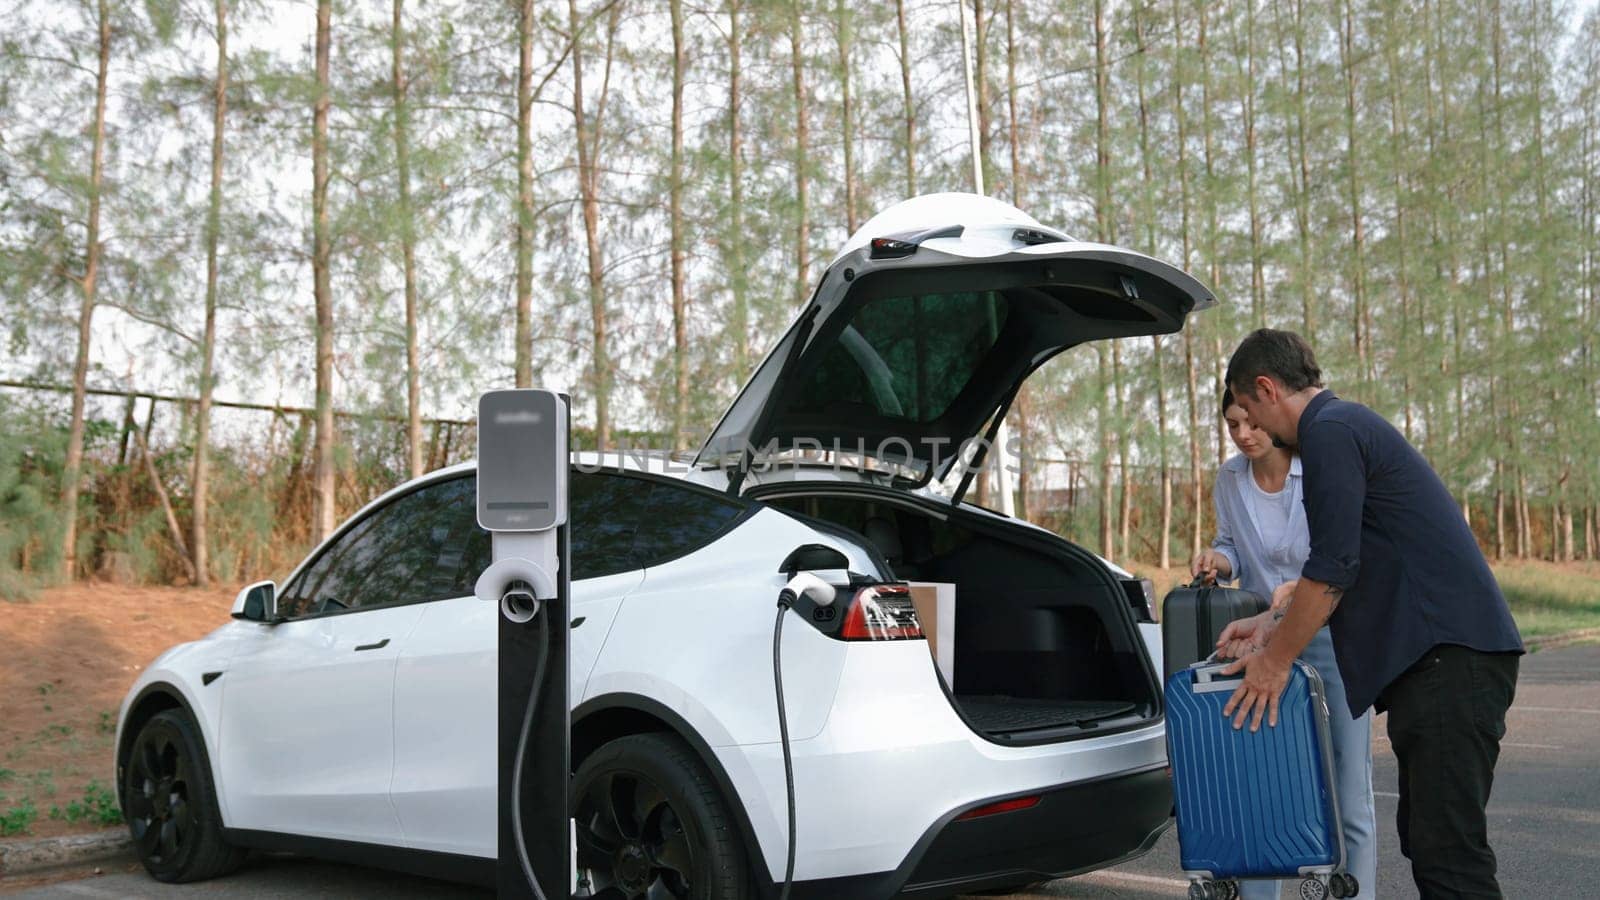 Couple recharge their EV car with electric battery charging station at rest stop during their road trip travel during autumnal season to national park. Relaxing holiday with eco friendly car. Exalt